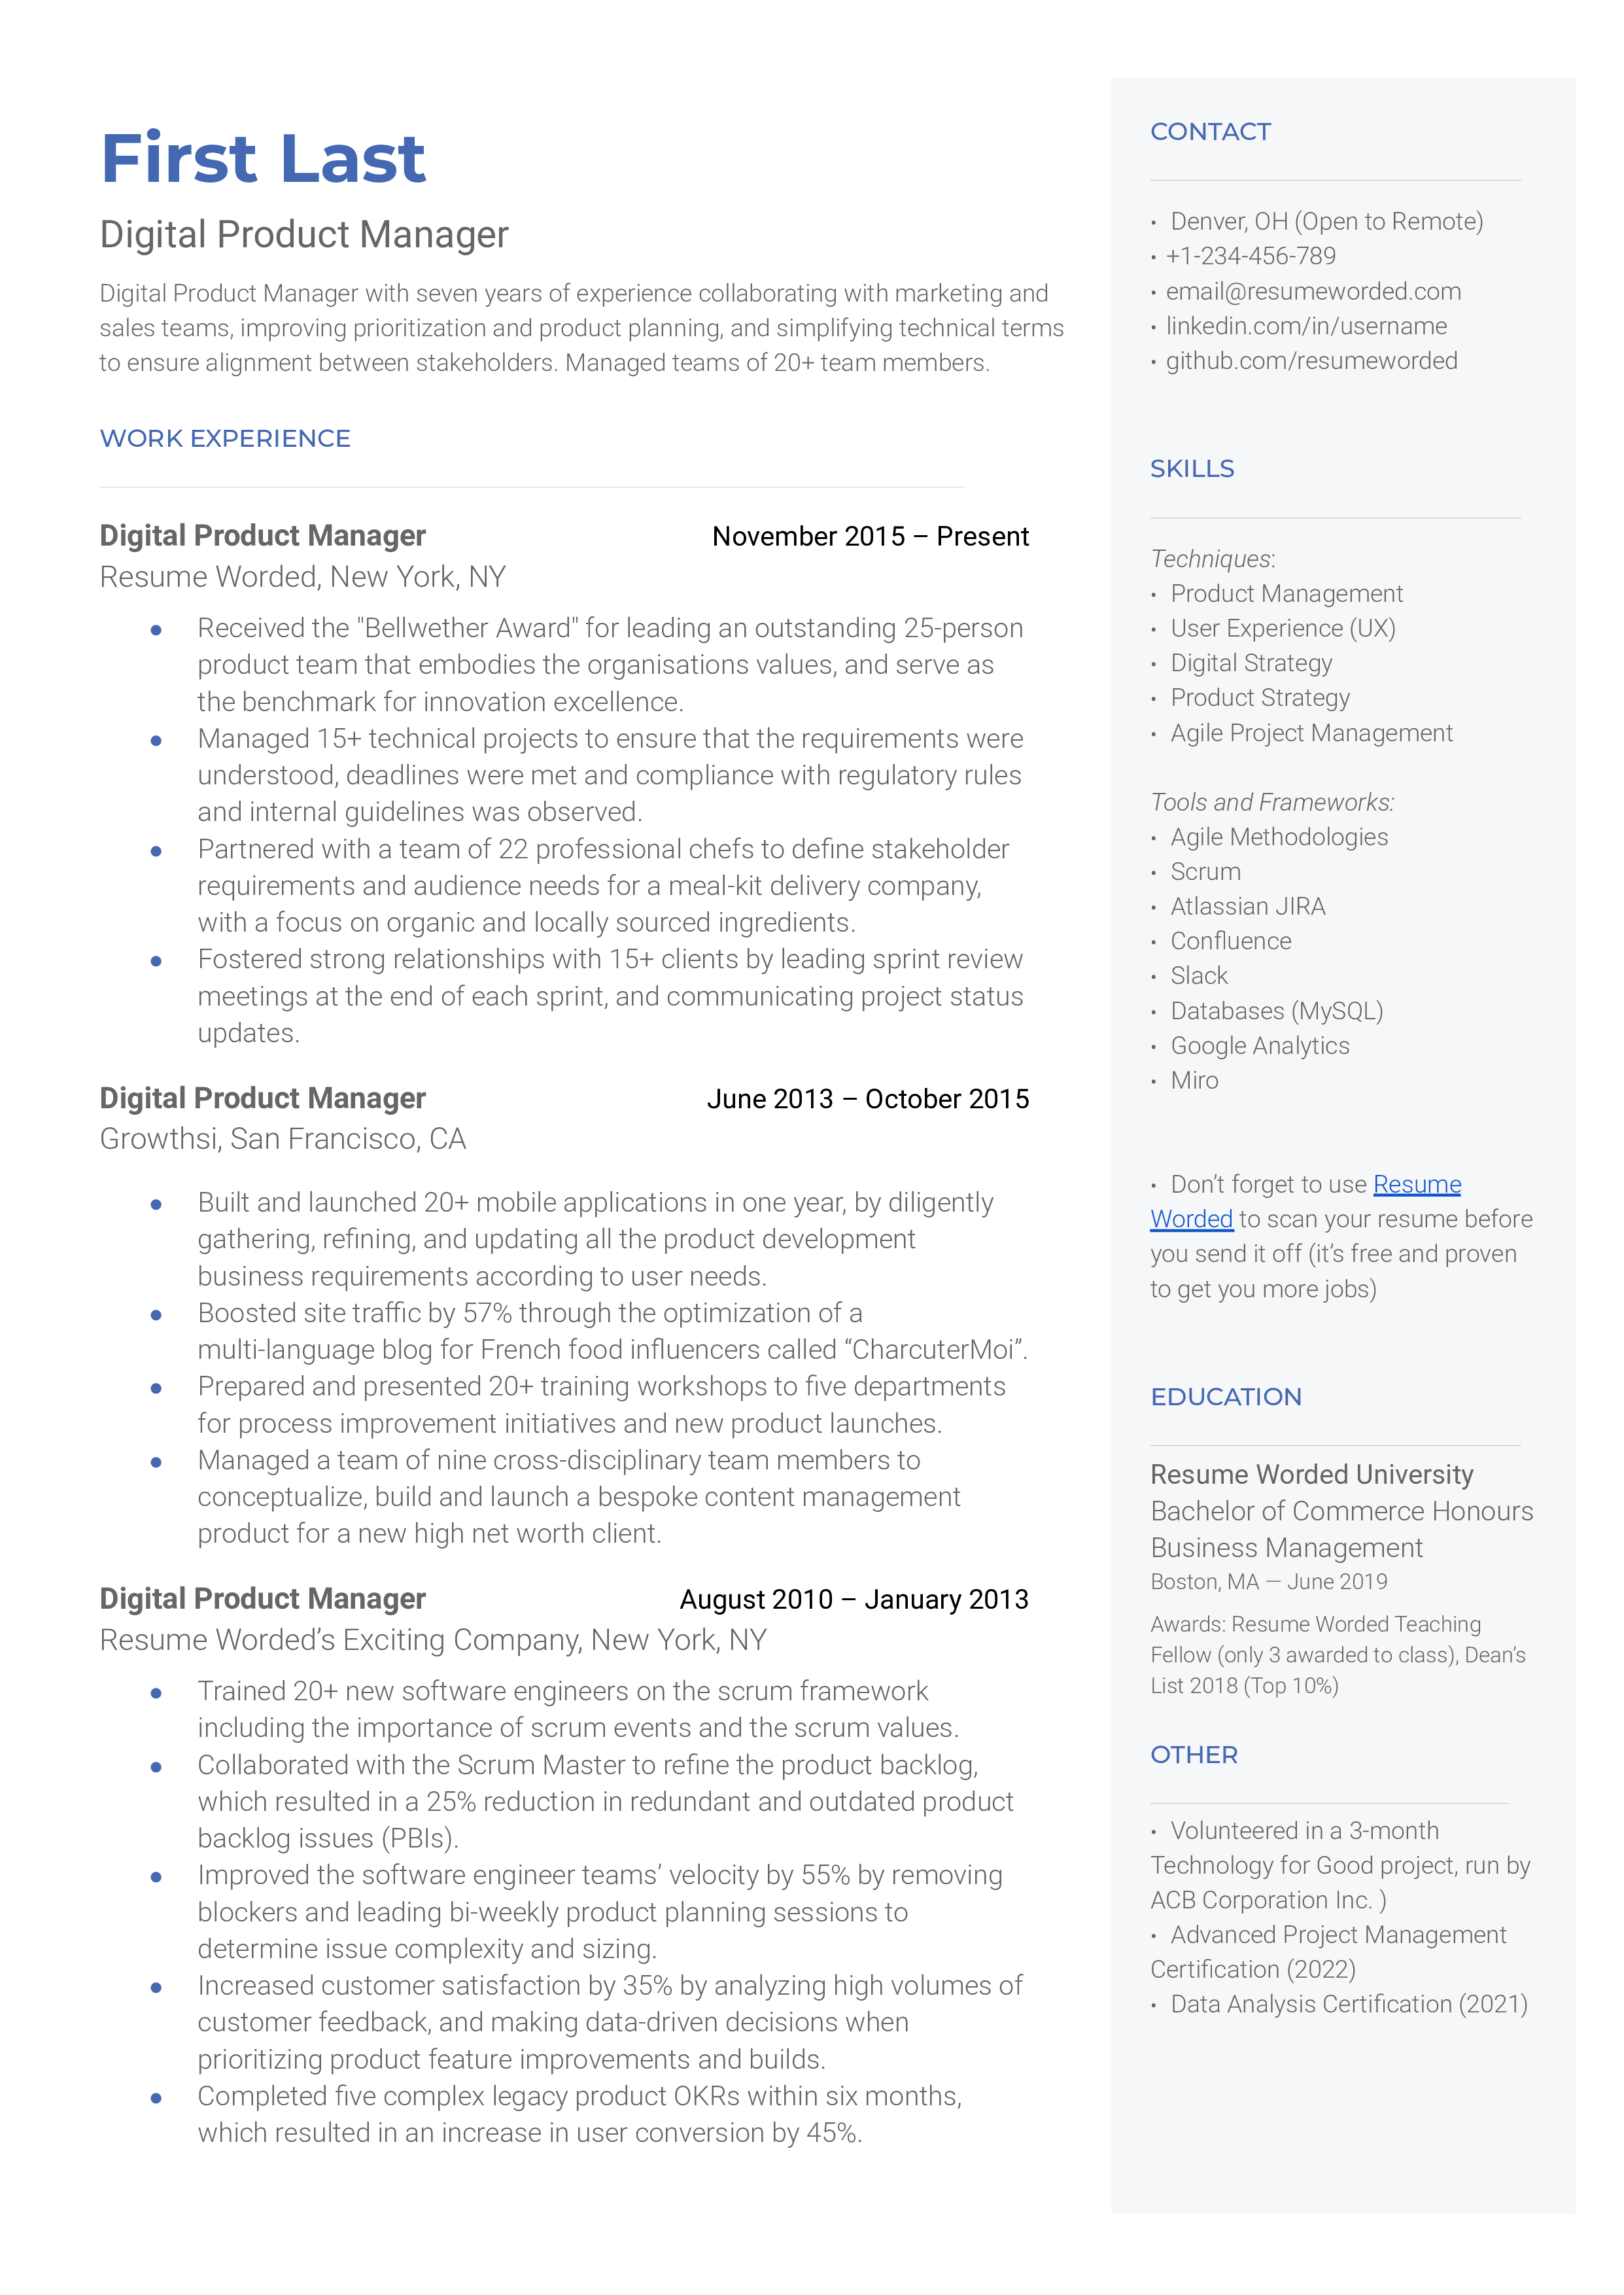 Digital product manager resume sample that highlight’s the applicant’s digital experience and management styles.